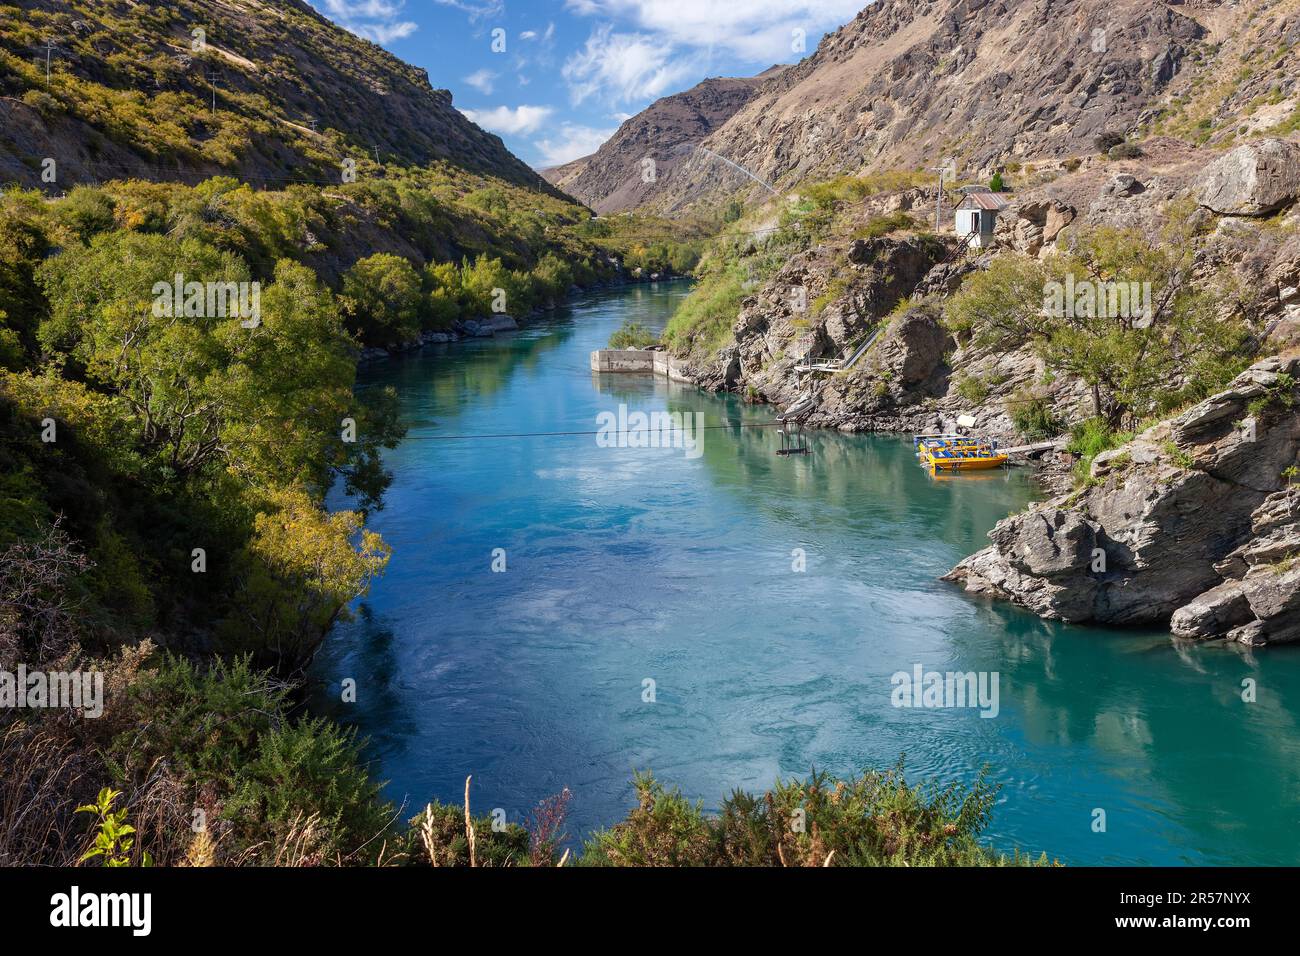 RIPPONVALE, CENTRAL OTAGO, NEW ZEALAND - FEBRUARY 17 : Old gold mining area of Ripponvale by the Kawarau River in New Zealand on February 17, 2012 Stock Photo